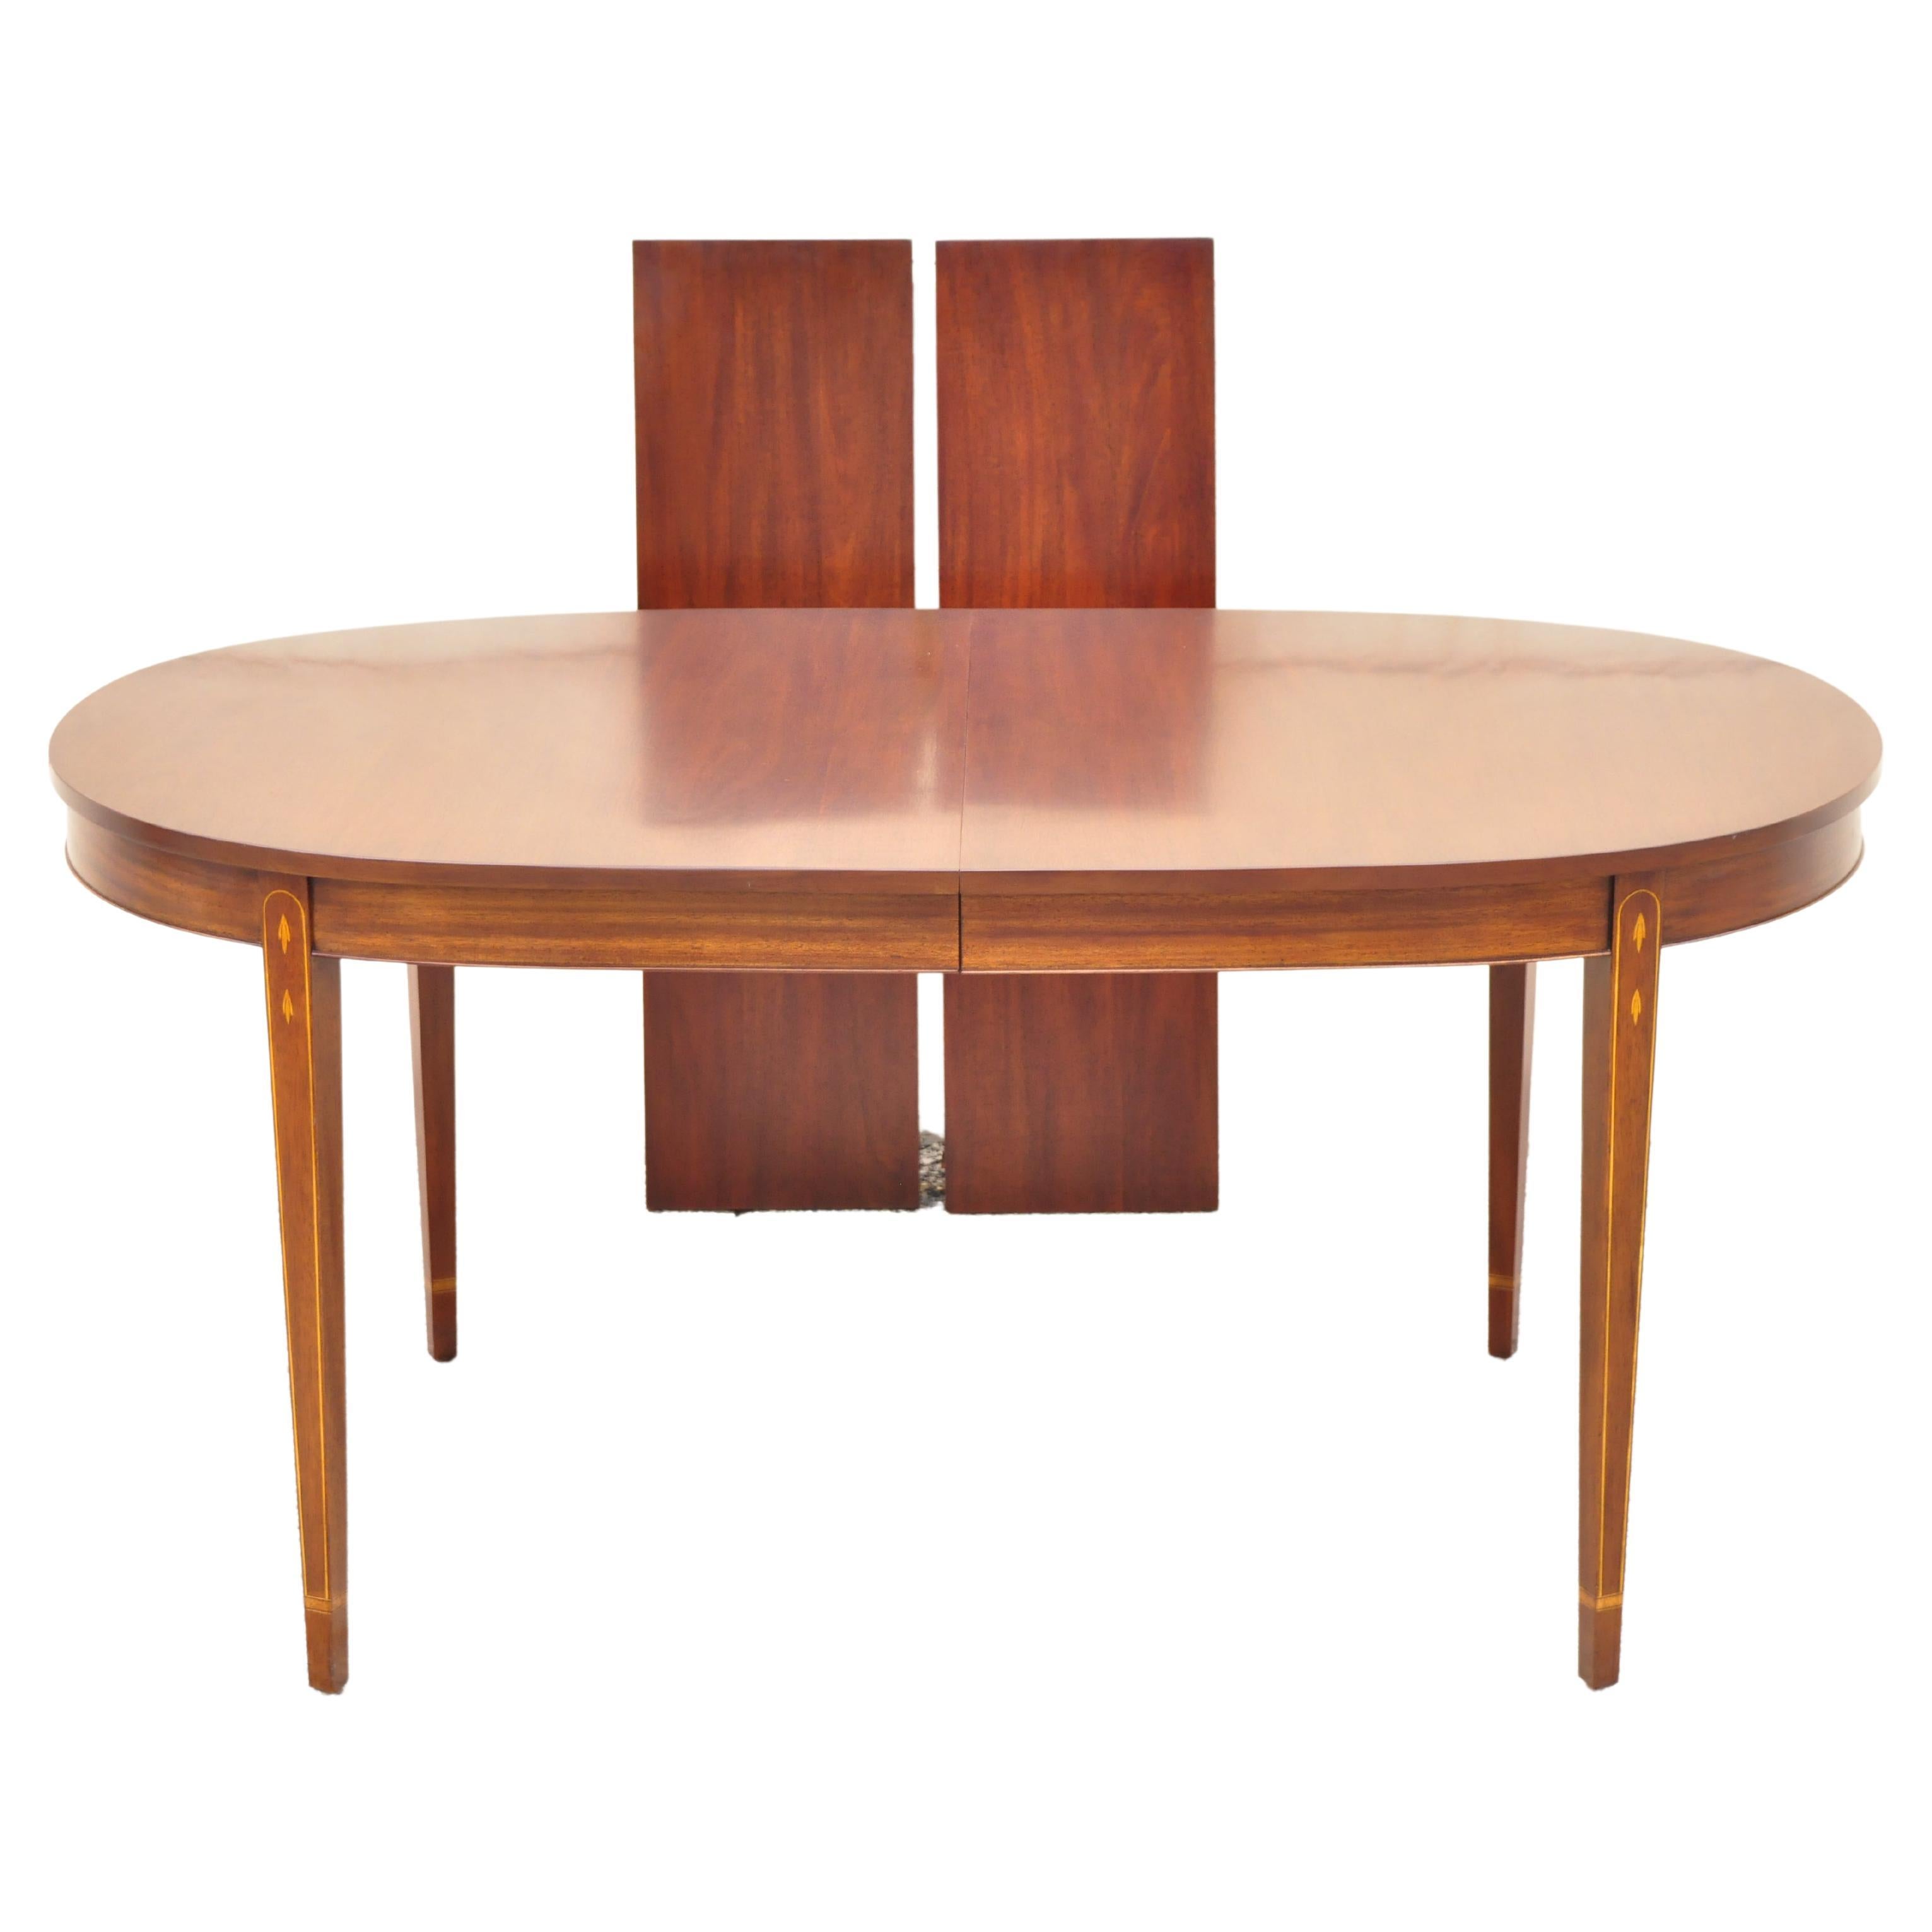 Henkel Harris Oval Mahogany Dining Room Table with Inlaid Legs and Two Leaves